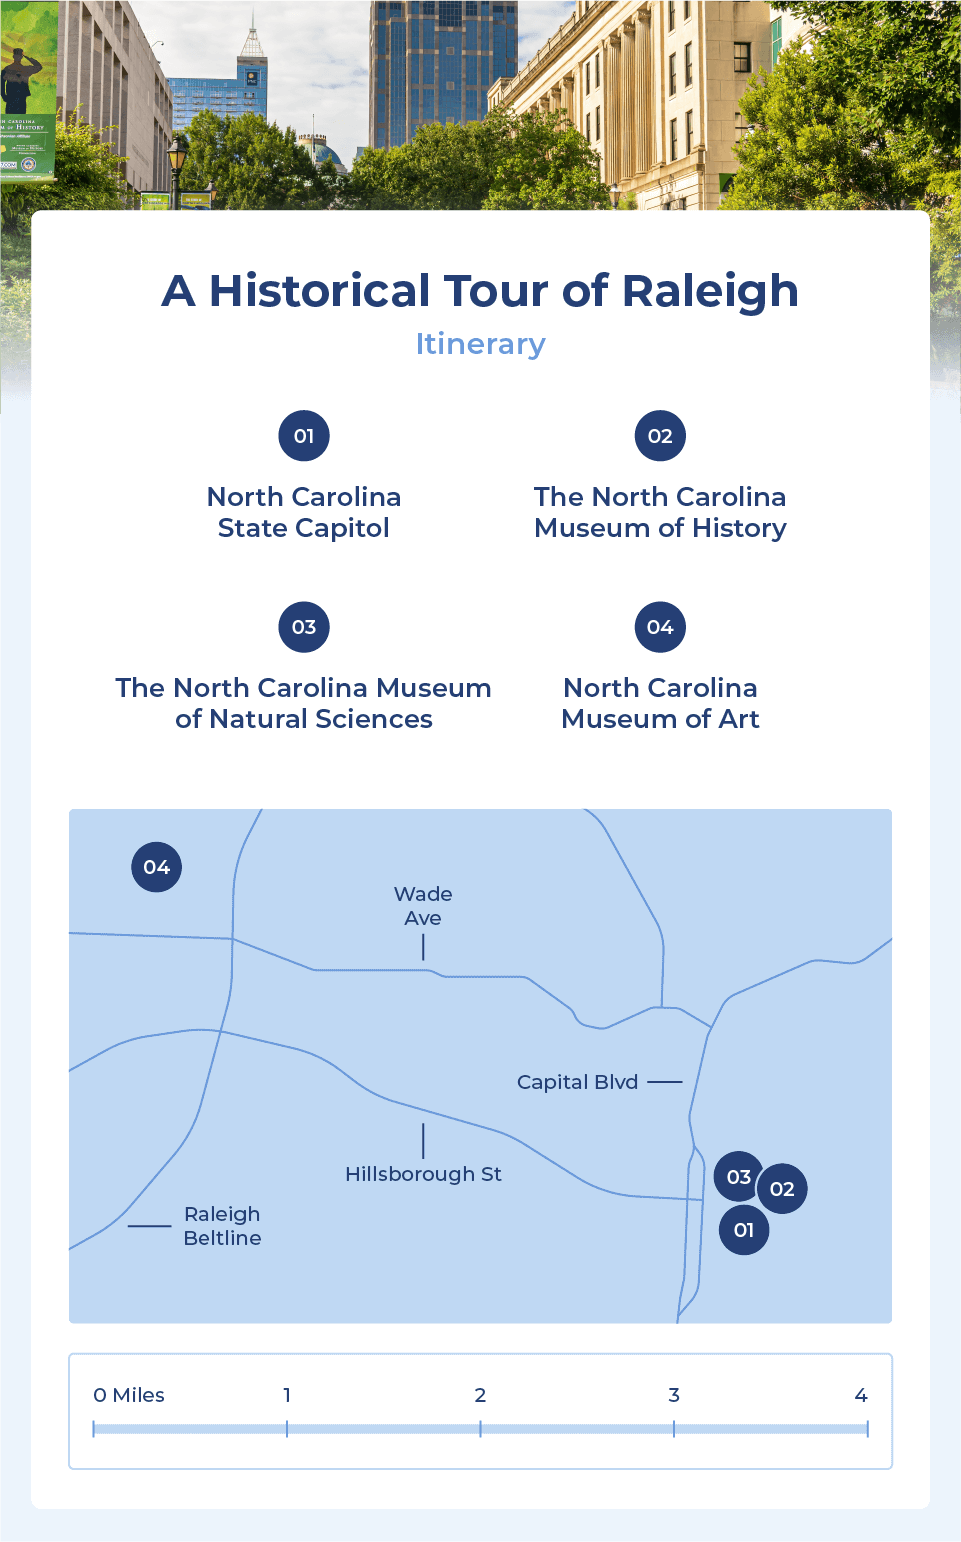 A historical tour of Raleigh would start at the North Carolina State Capitol, then go to the North Carolina Museum of History, then The North Carolina Museum of Natural Sciences, and end at the North Carolina Museum of Art.